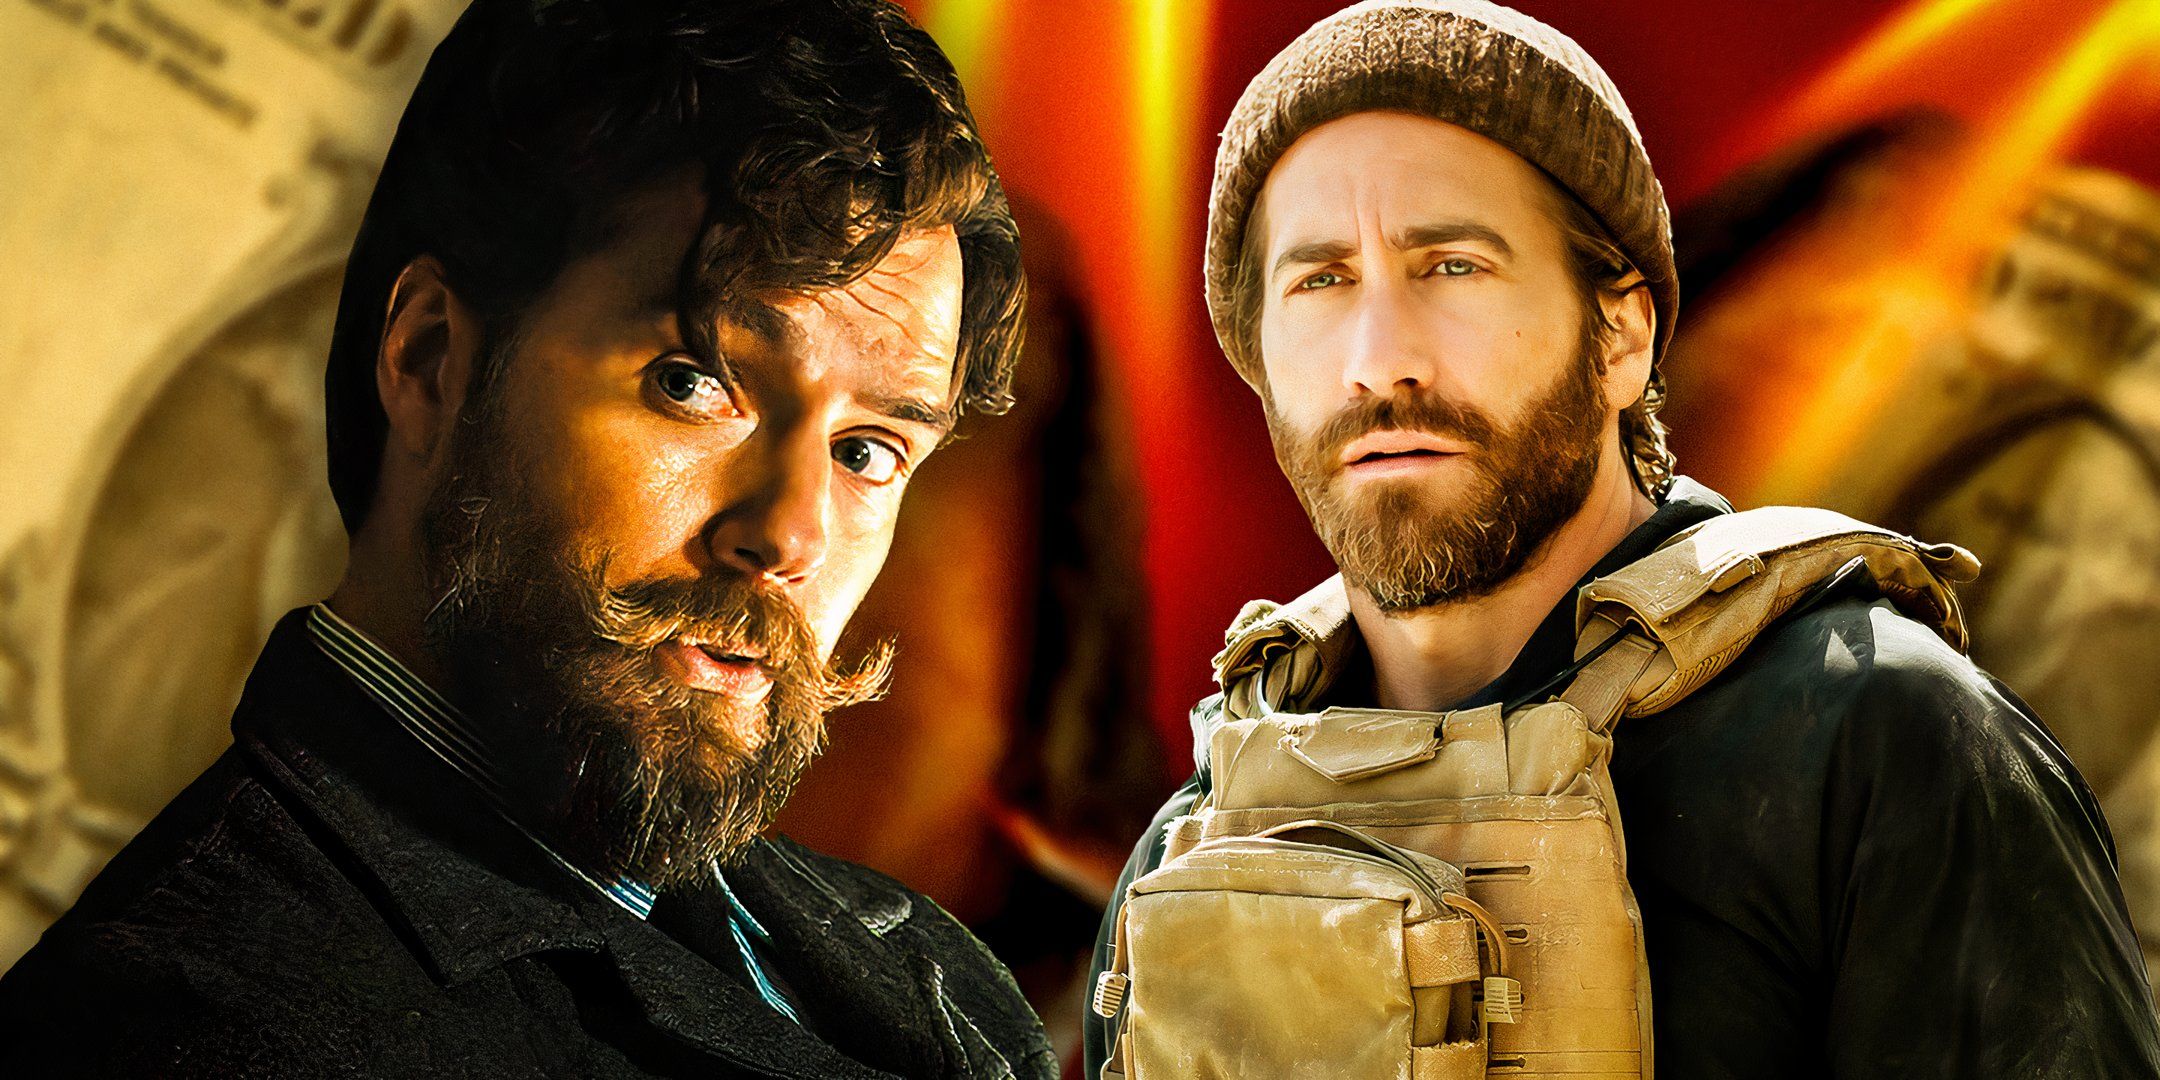 Henry-Cavill-as-Gus-March-Phillips-from-The-Ministry-of-Ungentlemanly-Warfare--and-Jake-Gyllenhaal-as-Master-Sergeant-John-Kinley-from-The-Covenant-